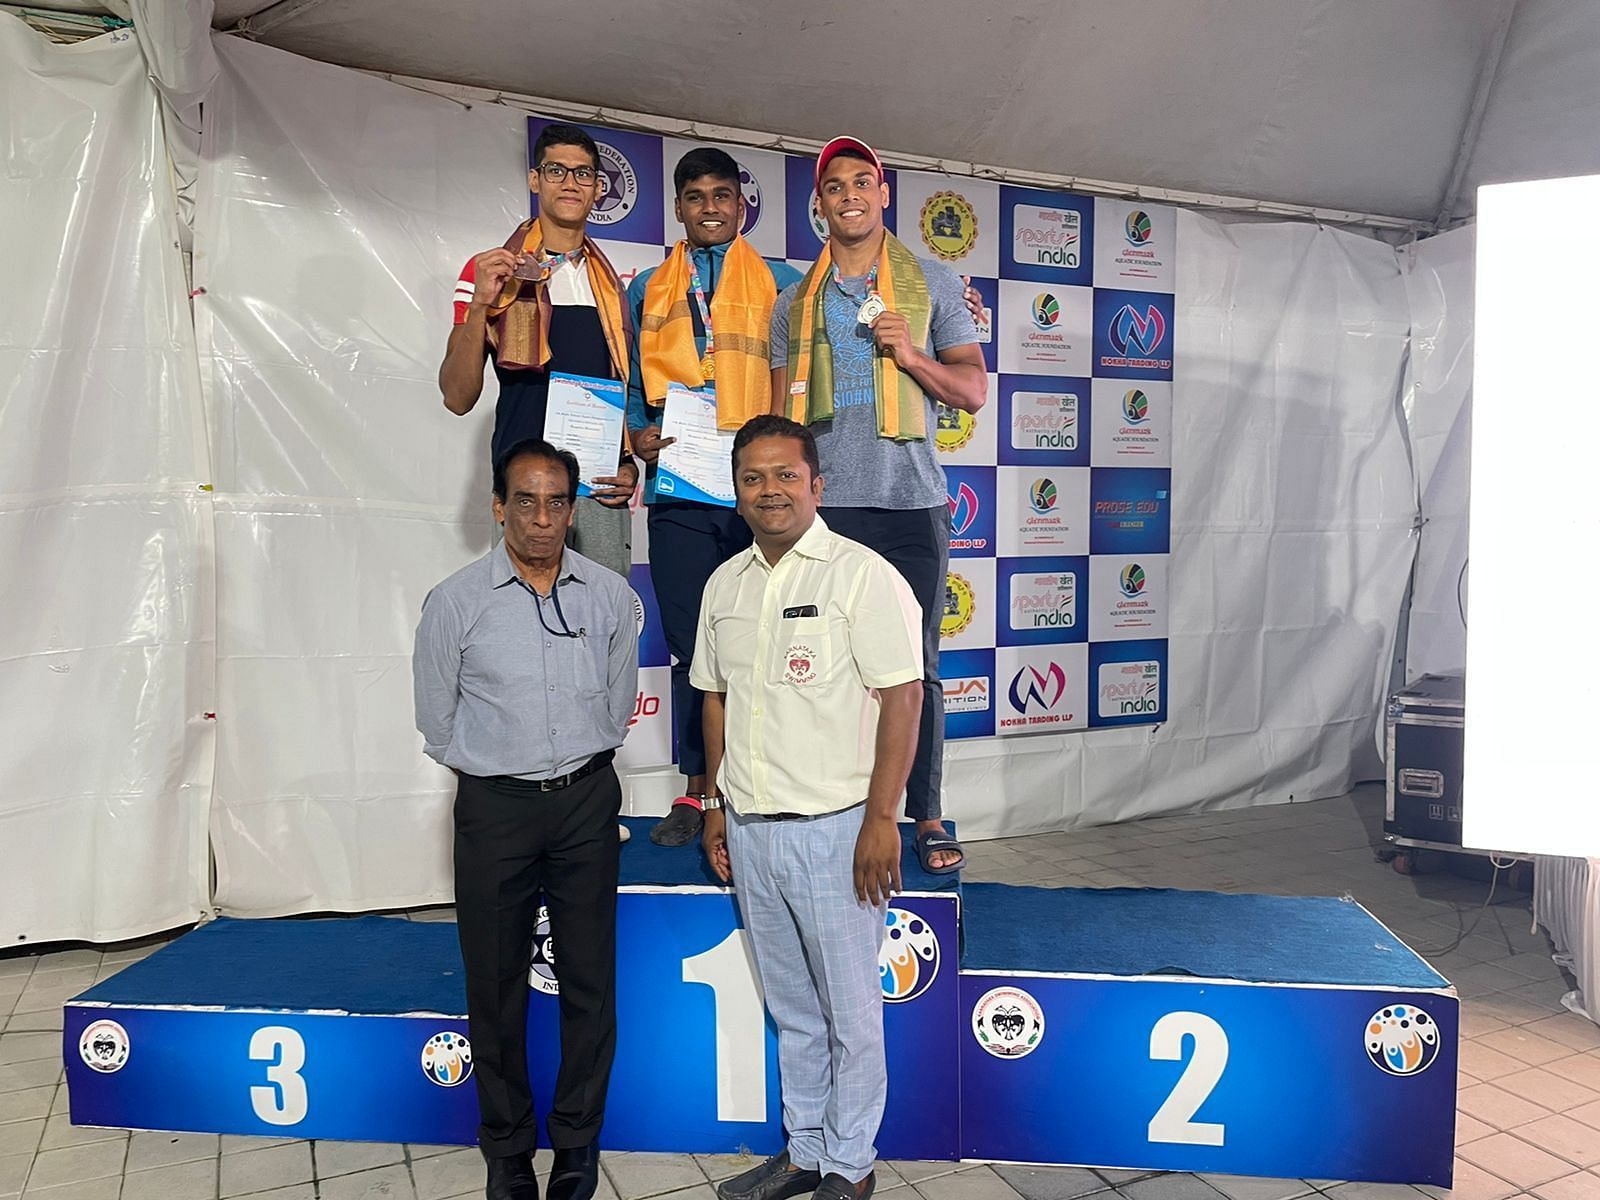 Sambhavv R flanked by Heer Shah (left) and Mihir Ambre at the medal ceremony of 50m freestyle event. (PC: SFI)